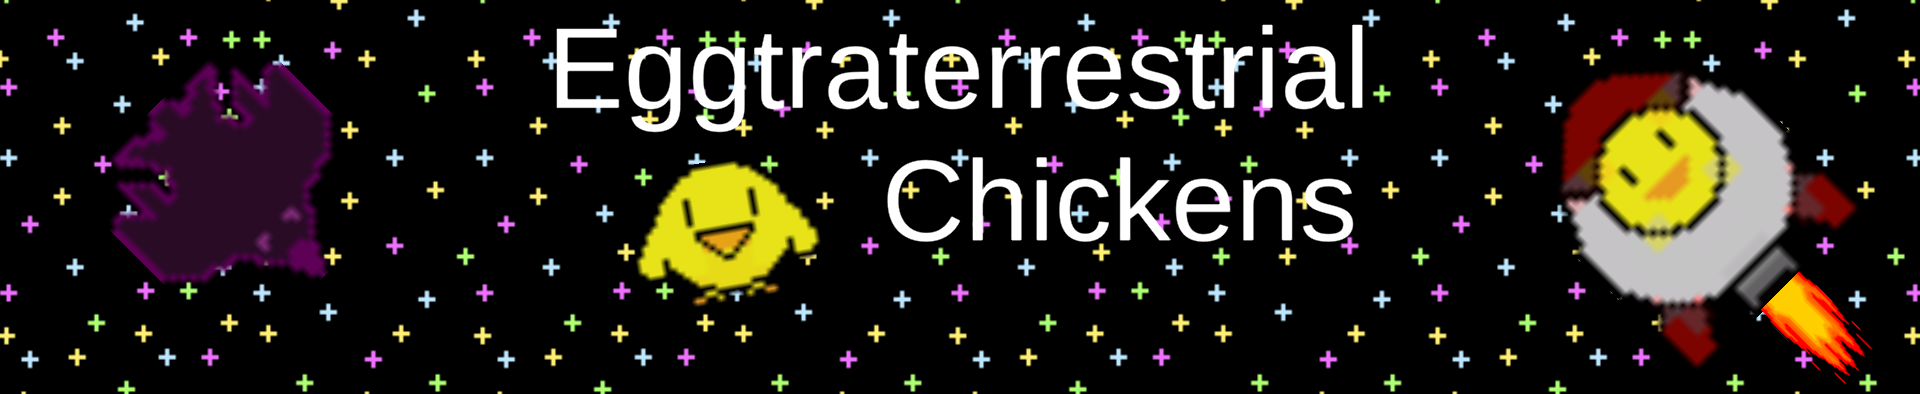 Eggtraterrestrial Chickens